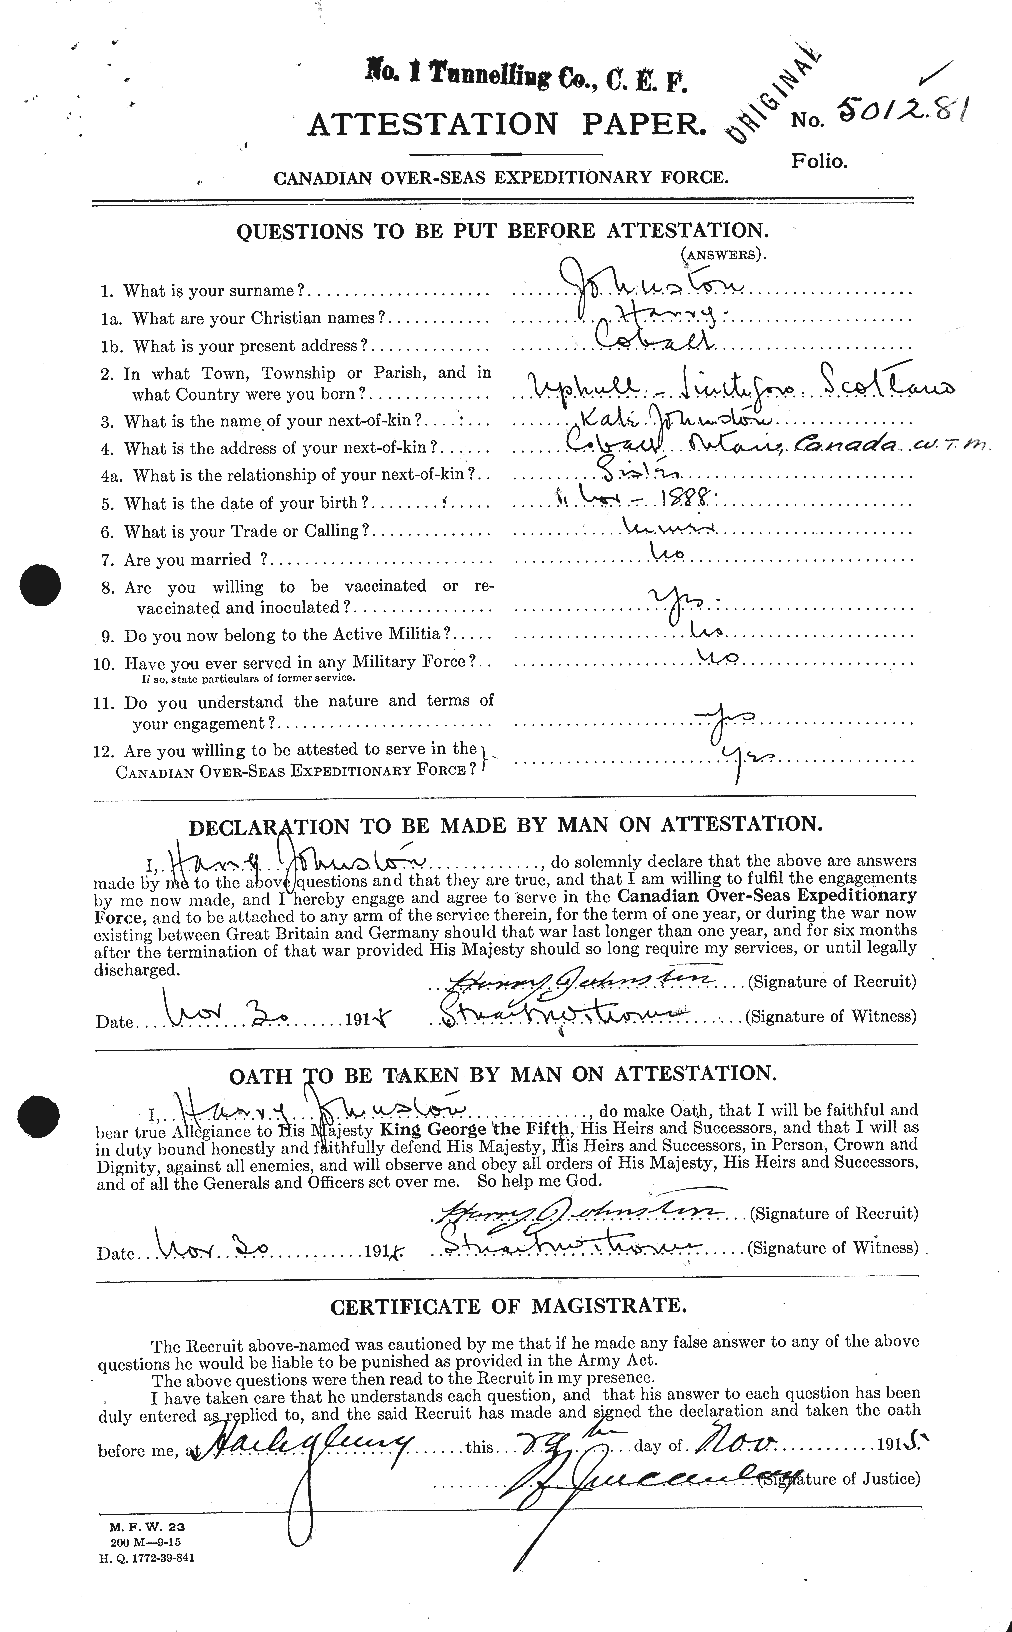 Personnel Records of the First World War - CEF 419505a